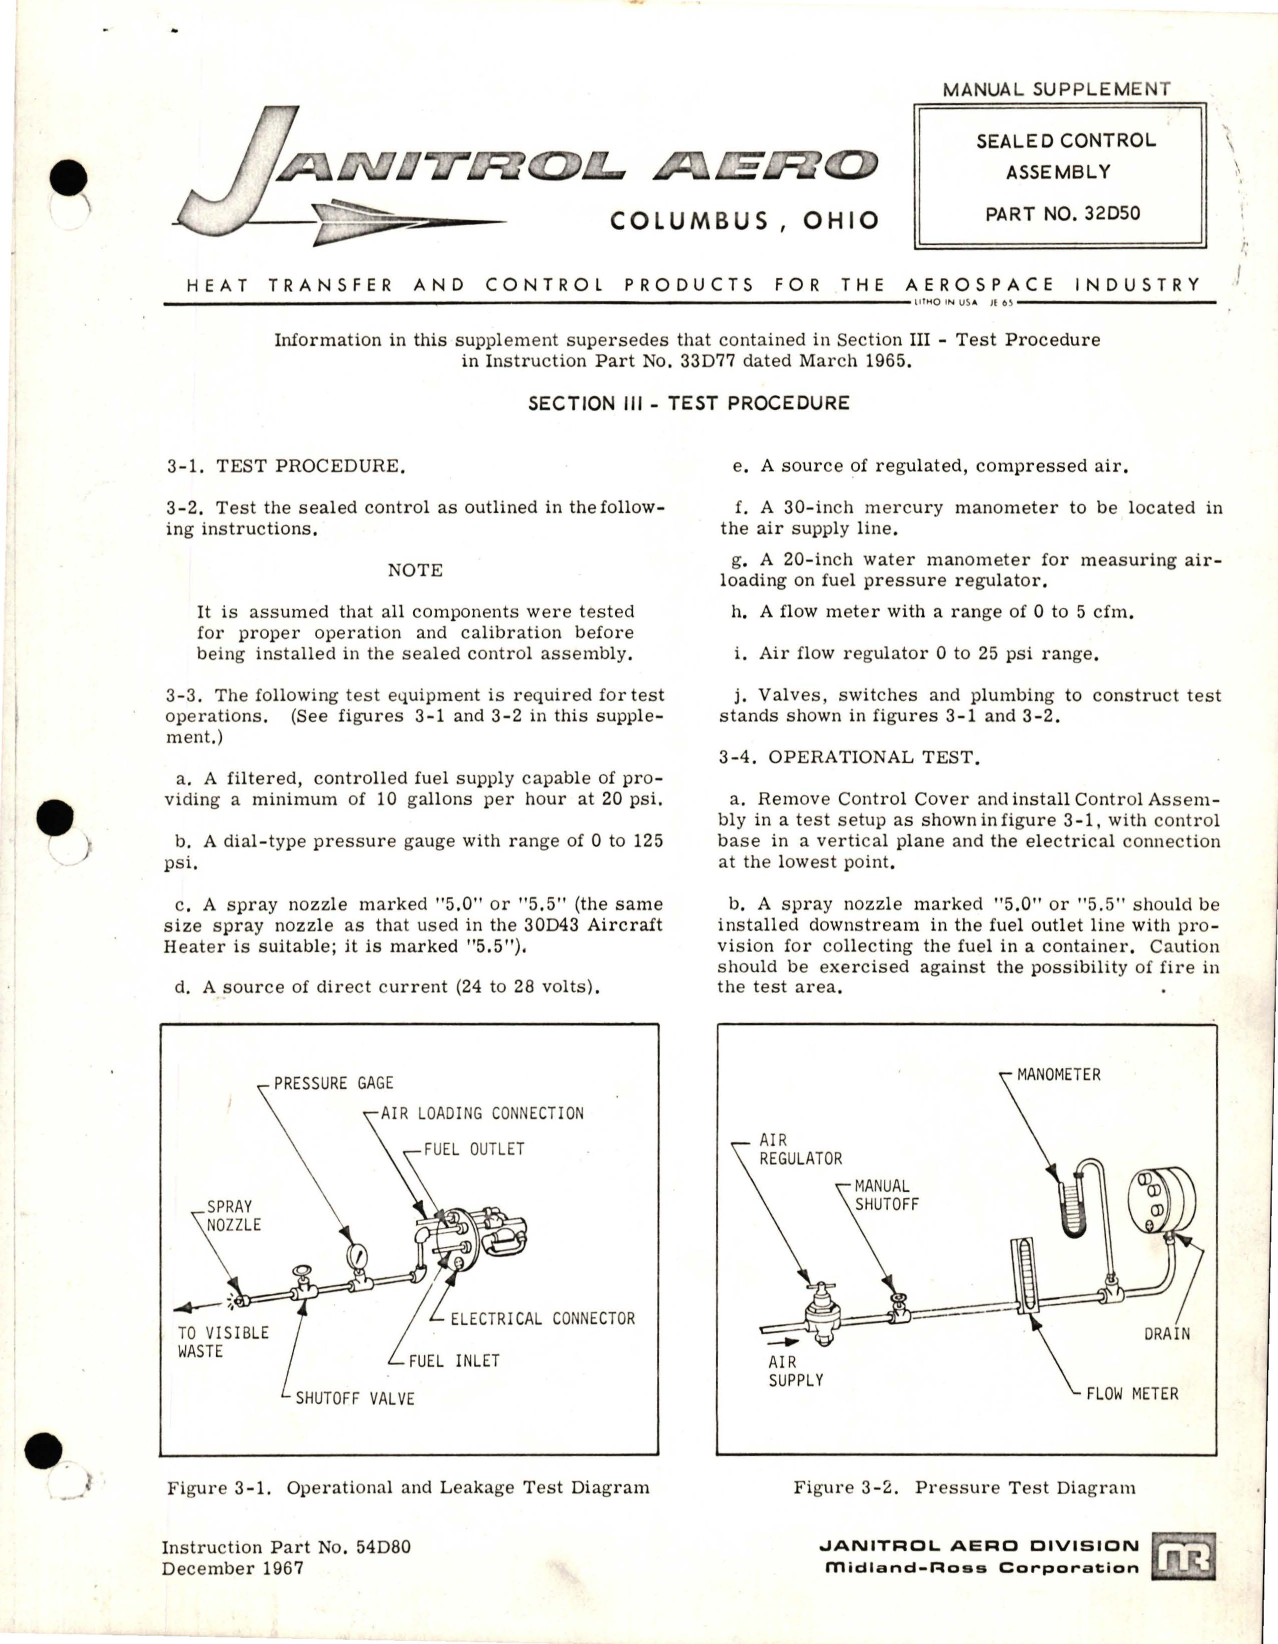 Sample page 9 from AirCorps Library document: Maintenance Instructions for Sealed Control Assembly - Part 32D50